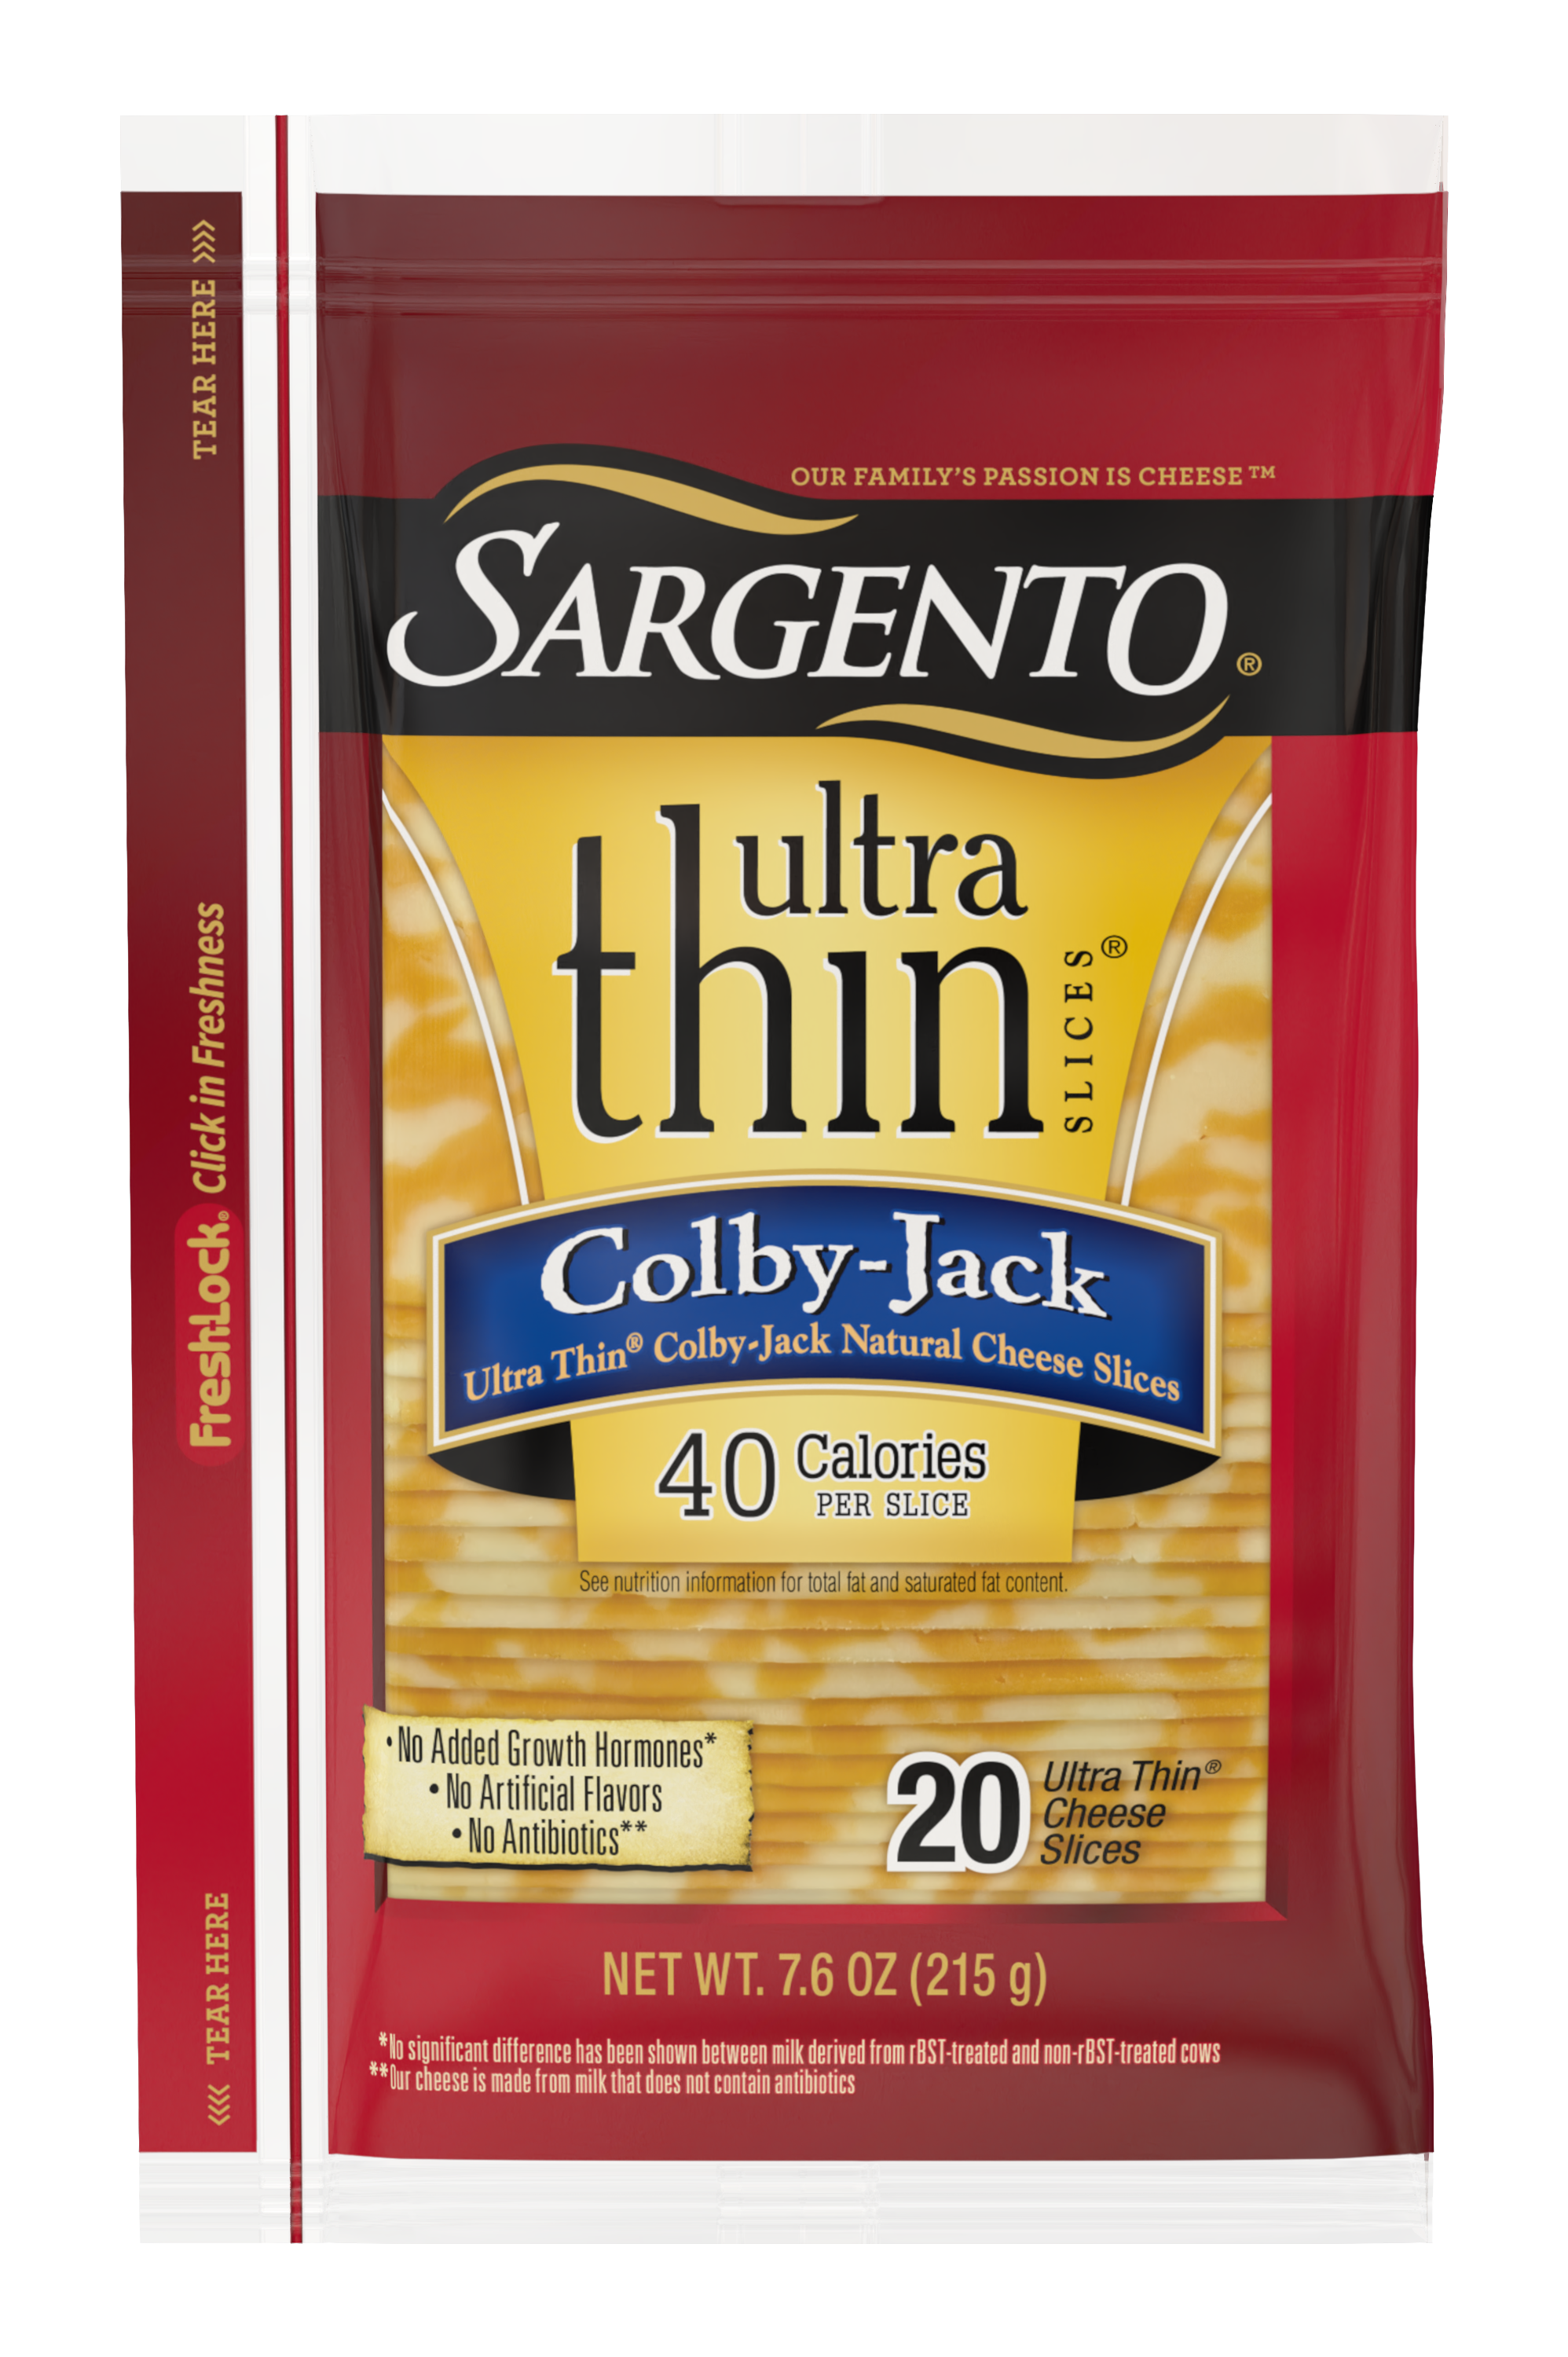 Sargento® Colby-Jack Natural Cheese Ultra Thin® Slices